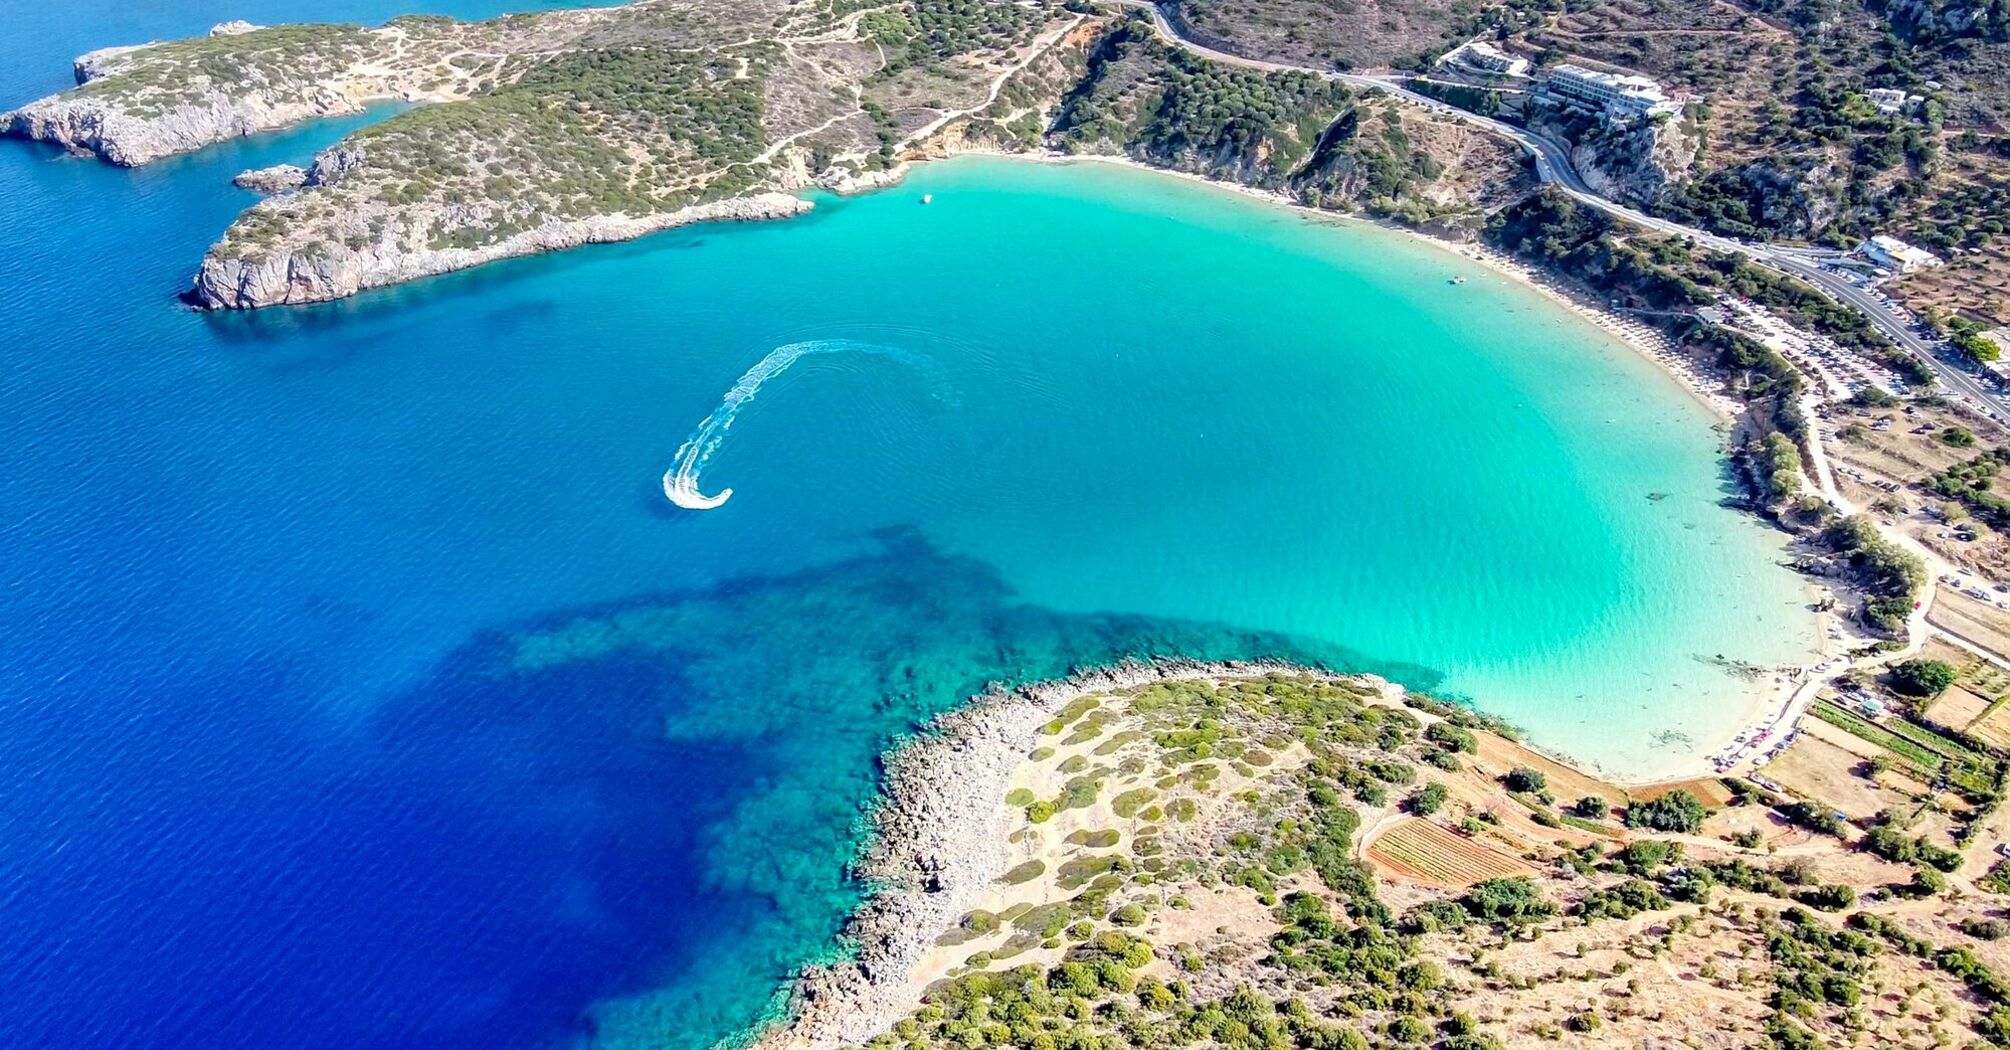 Aerial view of a beautiful bay with turquoise waters